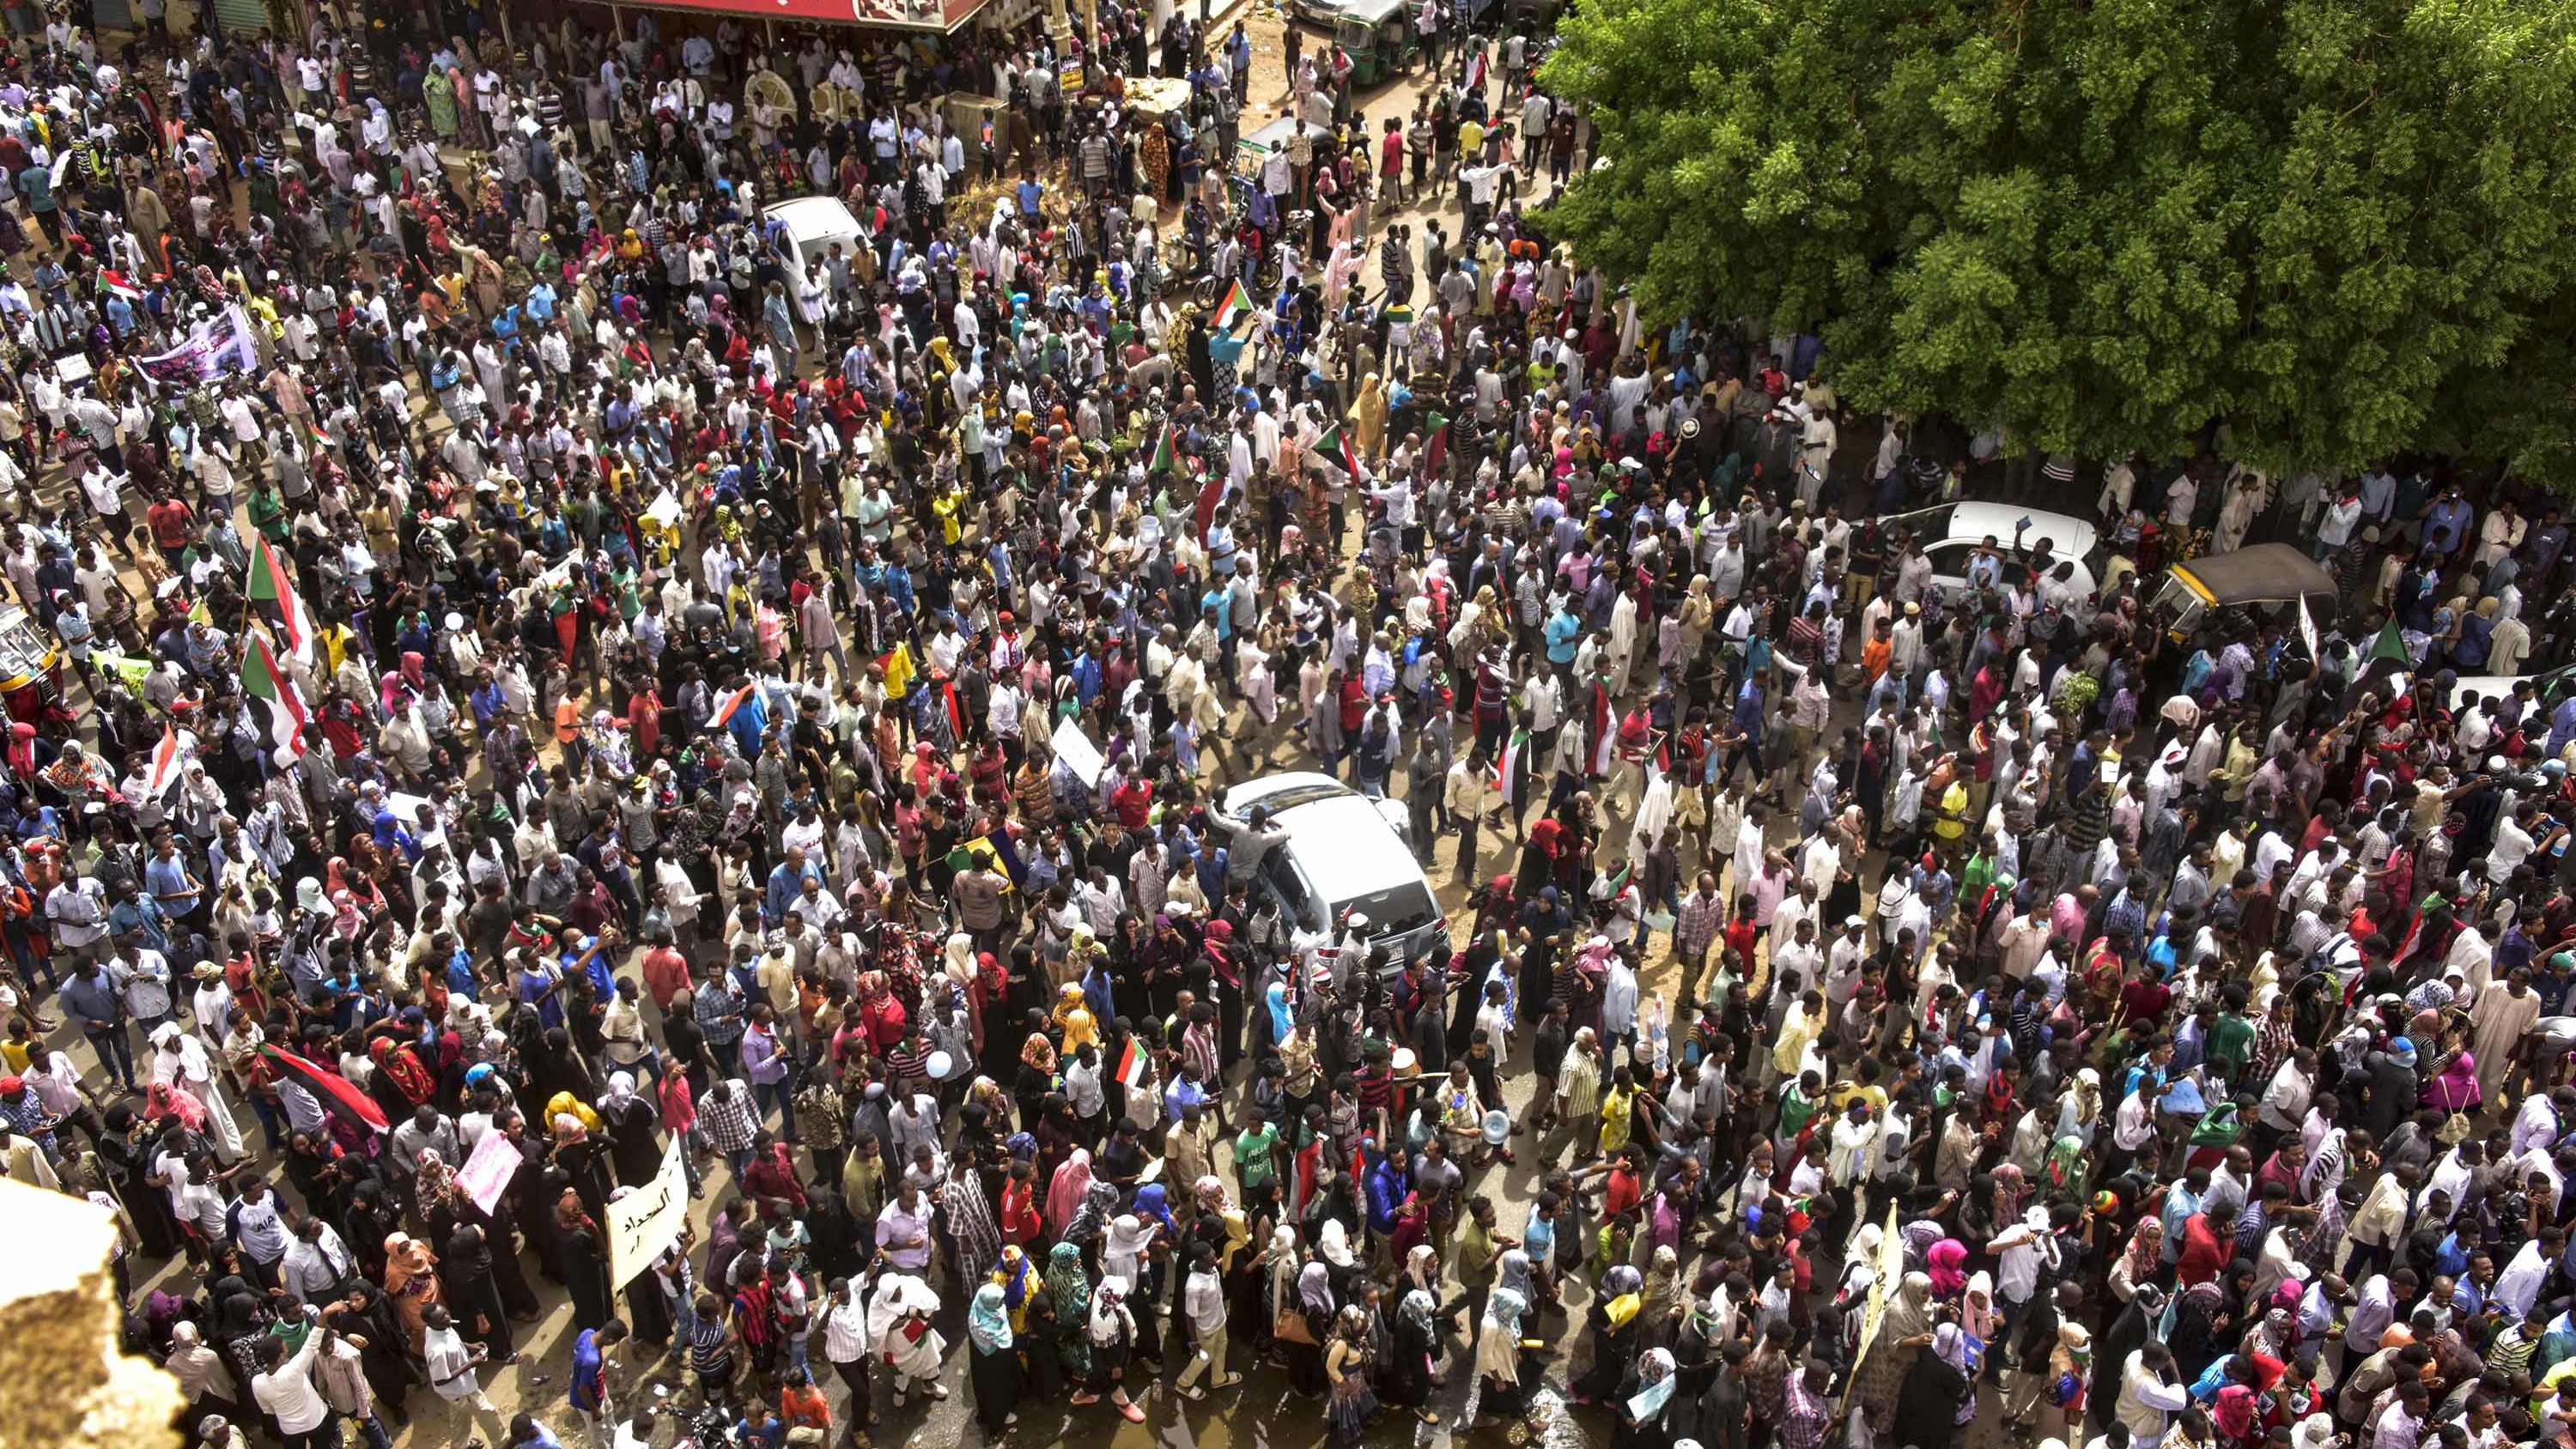 Sudanese protesters march in a mass demonstration against the country's ruling generals in the capital's twin city of Omdurman on June 30.